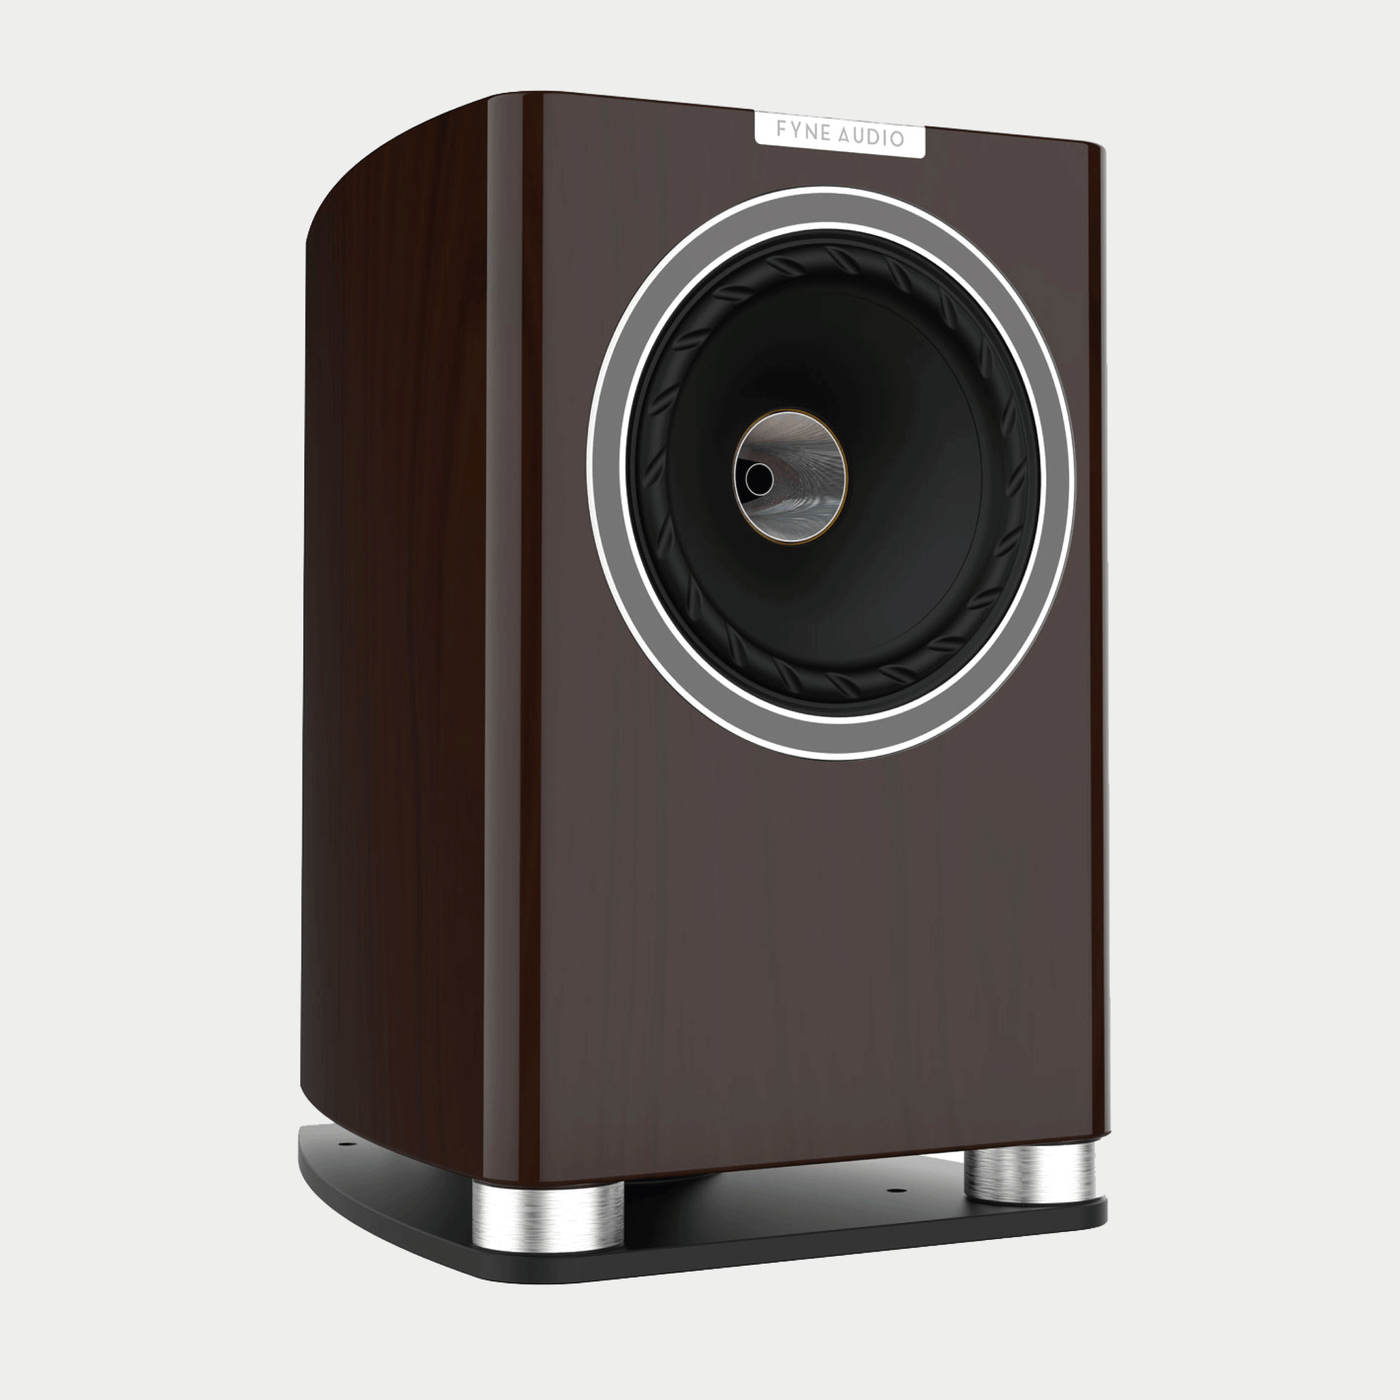 Fyne Audio F700 is a beautiful speaker made from oak that makes your music sound better.